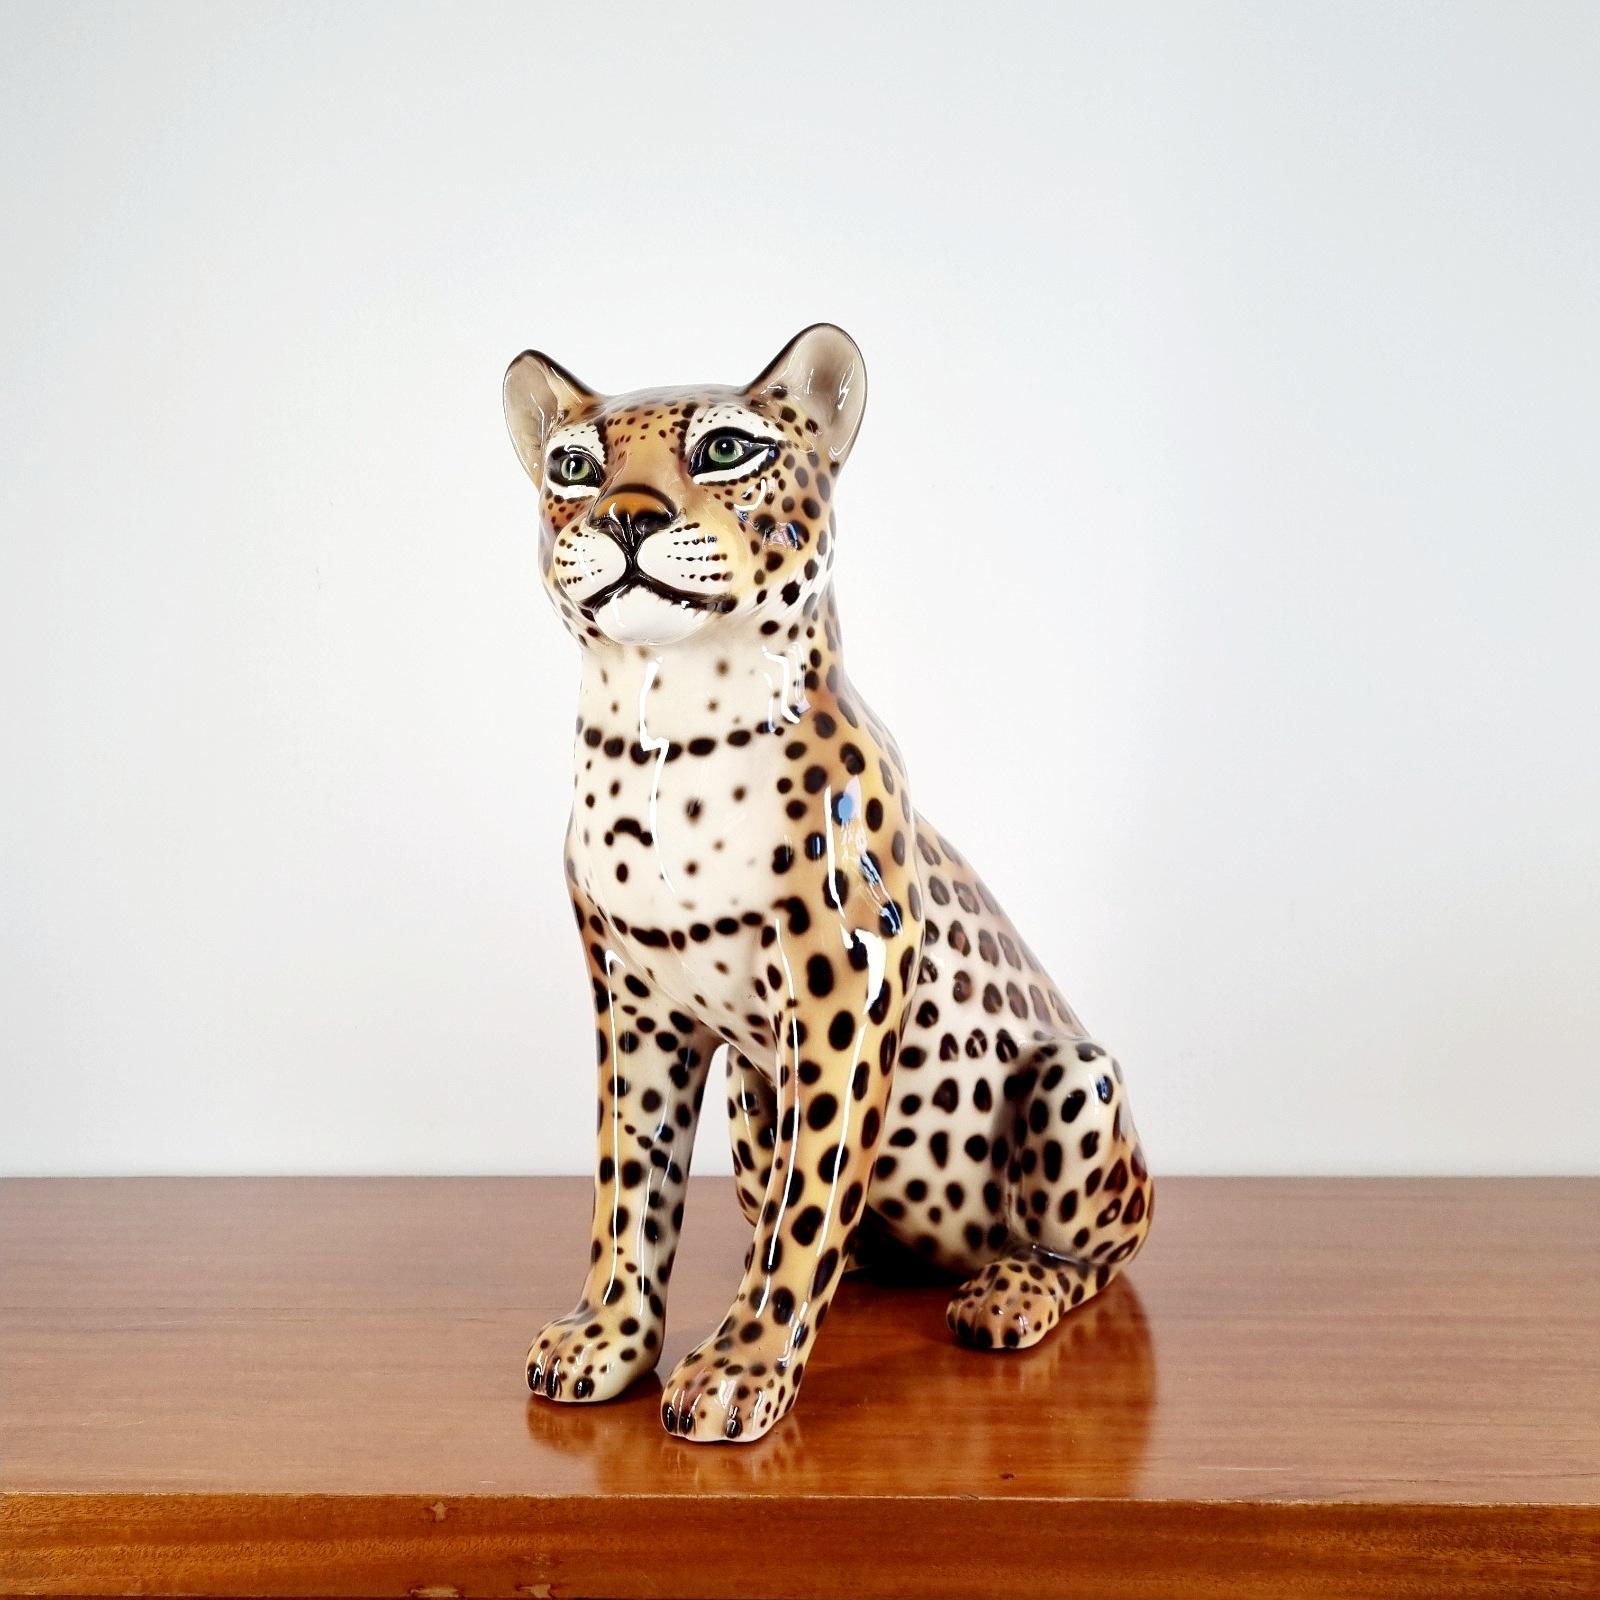 Large vintage leopard sculpture.
Exceptionaly beautiful piece with wonderful realistic details. Made in Italy in the 70s. In excelent condition. No signs of use and age.

Classic italian design